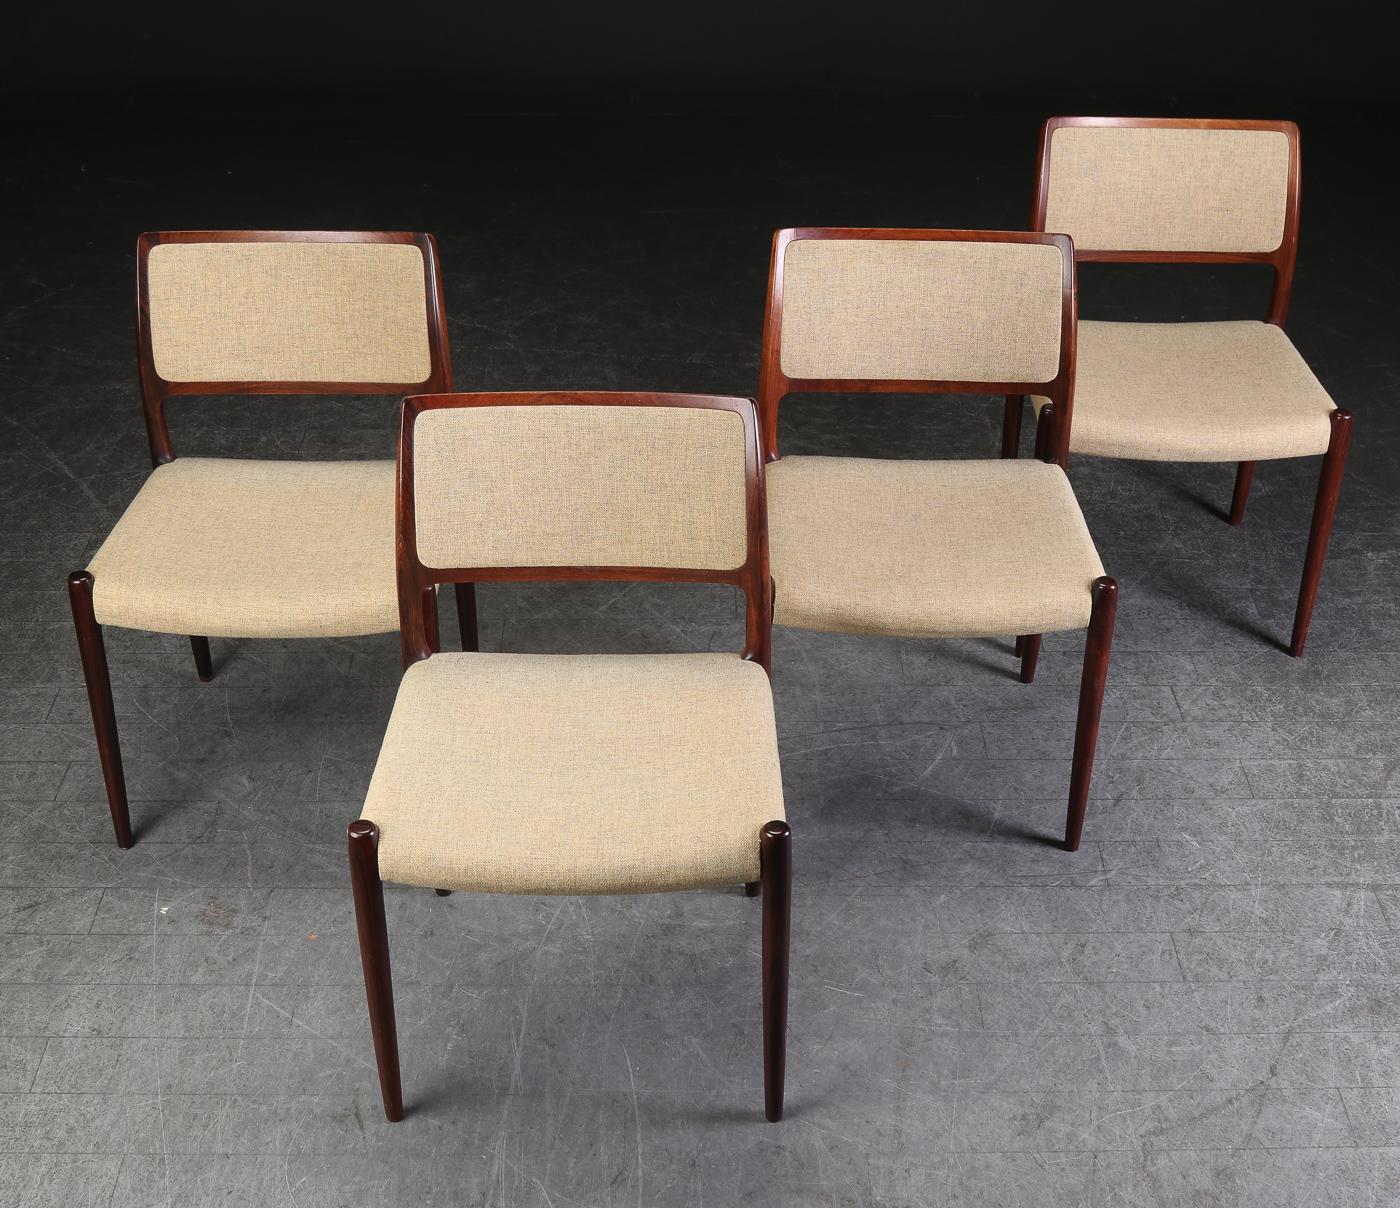 Niels Otto Moller Rosewood Armchair Mod N° 80 Set of 4 In Good Condition For Sale In Paris, FR